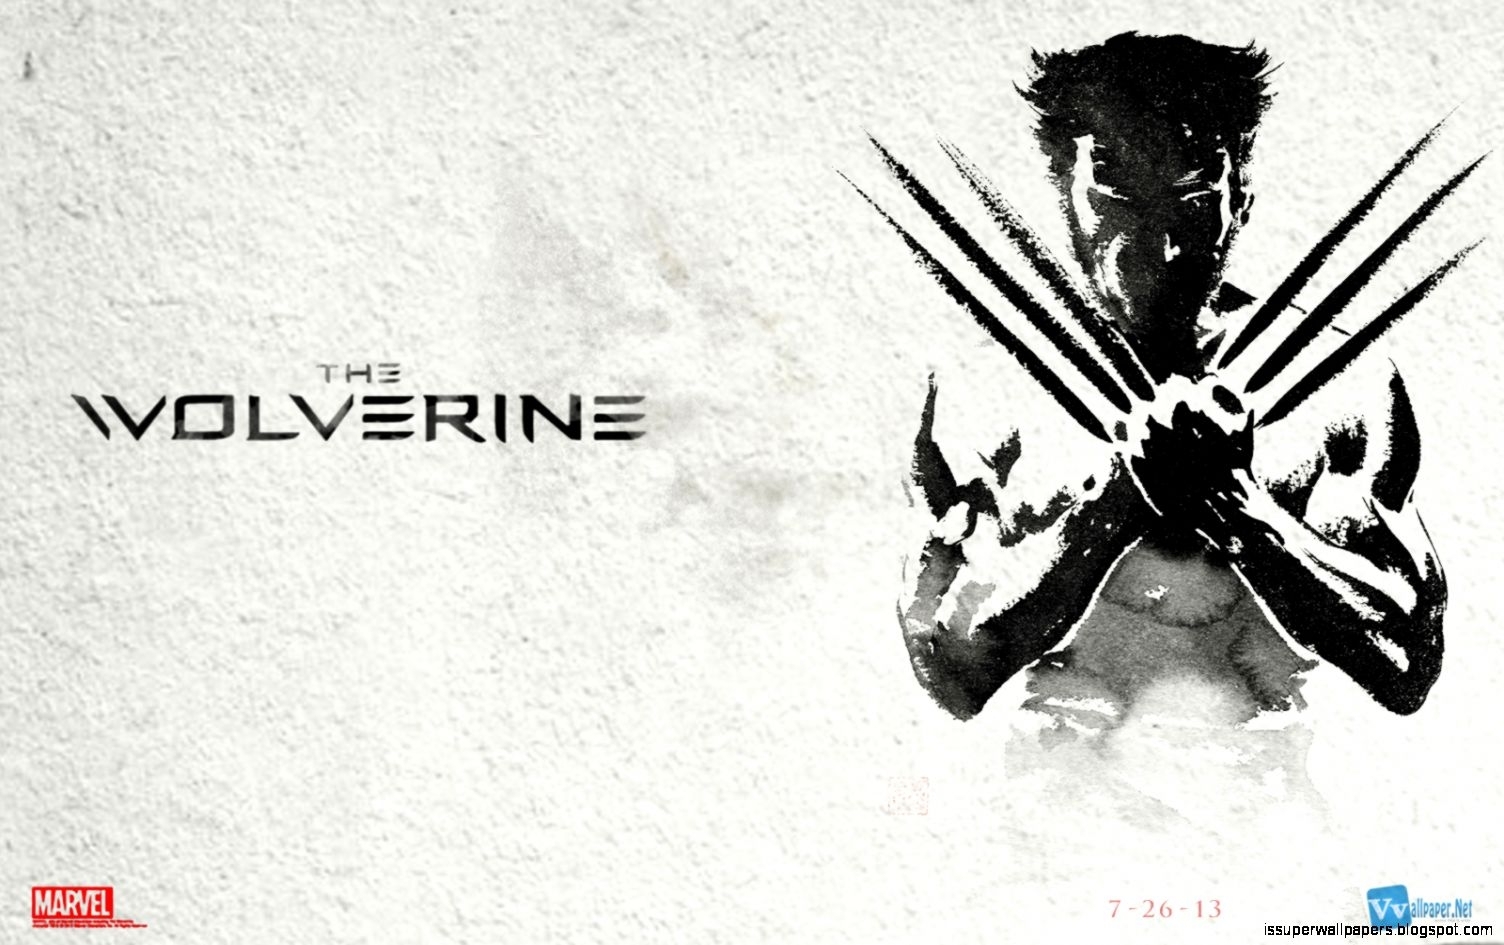 the wolverine movie wallpaper hd | super wallpapers